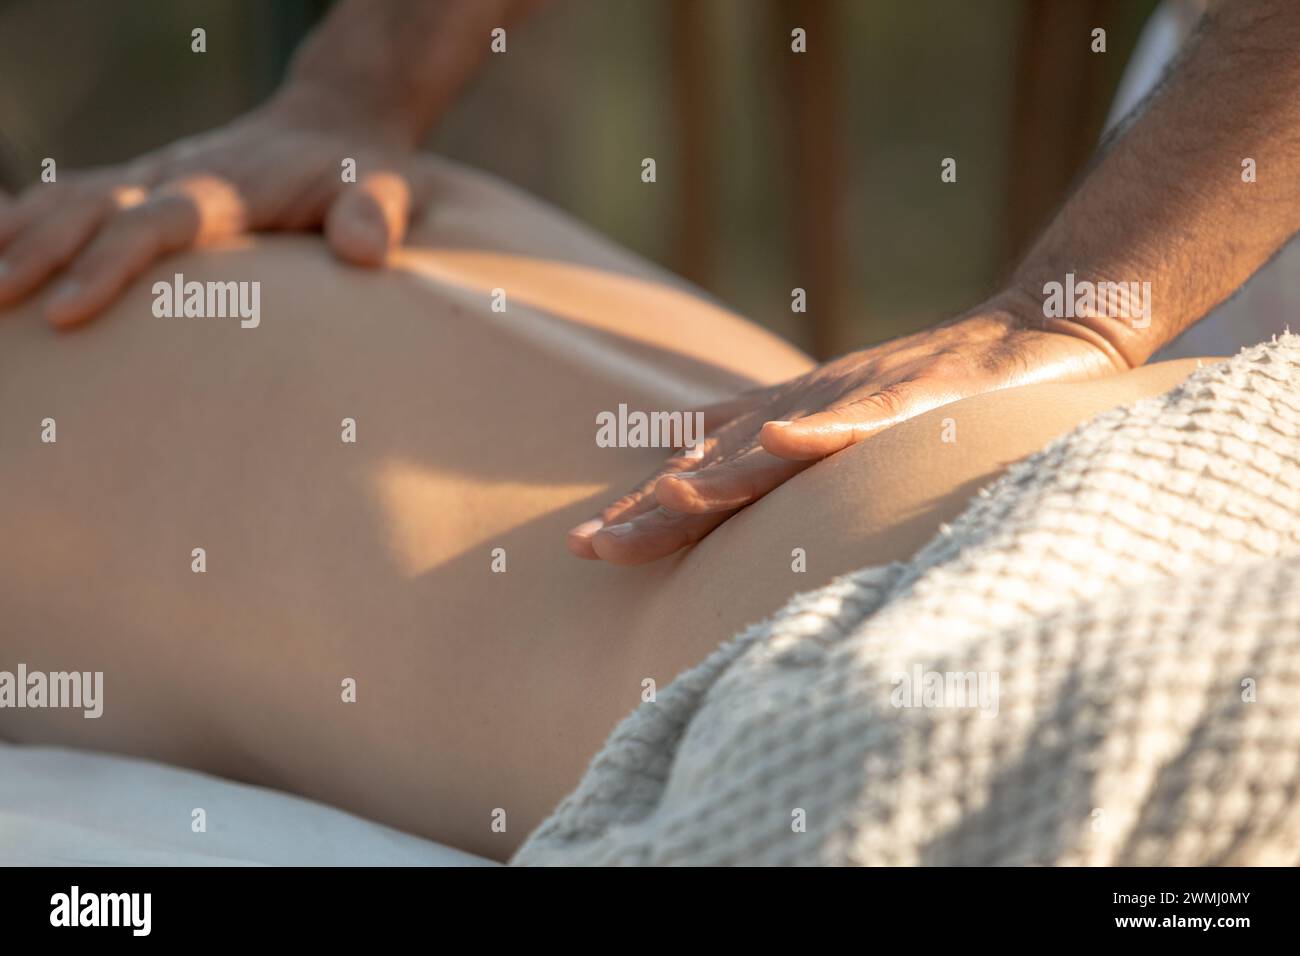 Soothing Back Massage Therapy: Gentle Hand Strokes by a Professional on Female Client's Lower Back with Warm Sunset Light Stock Photo